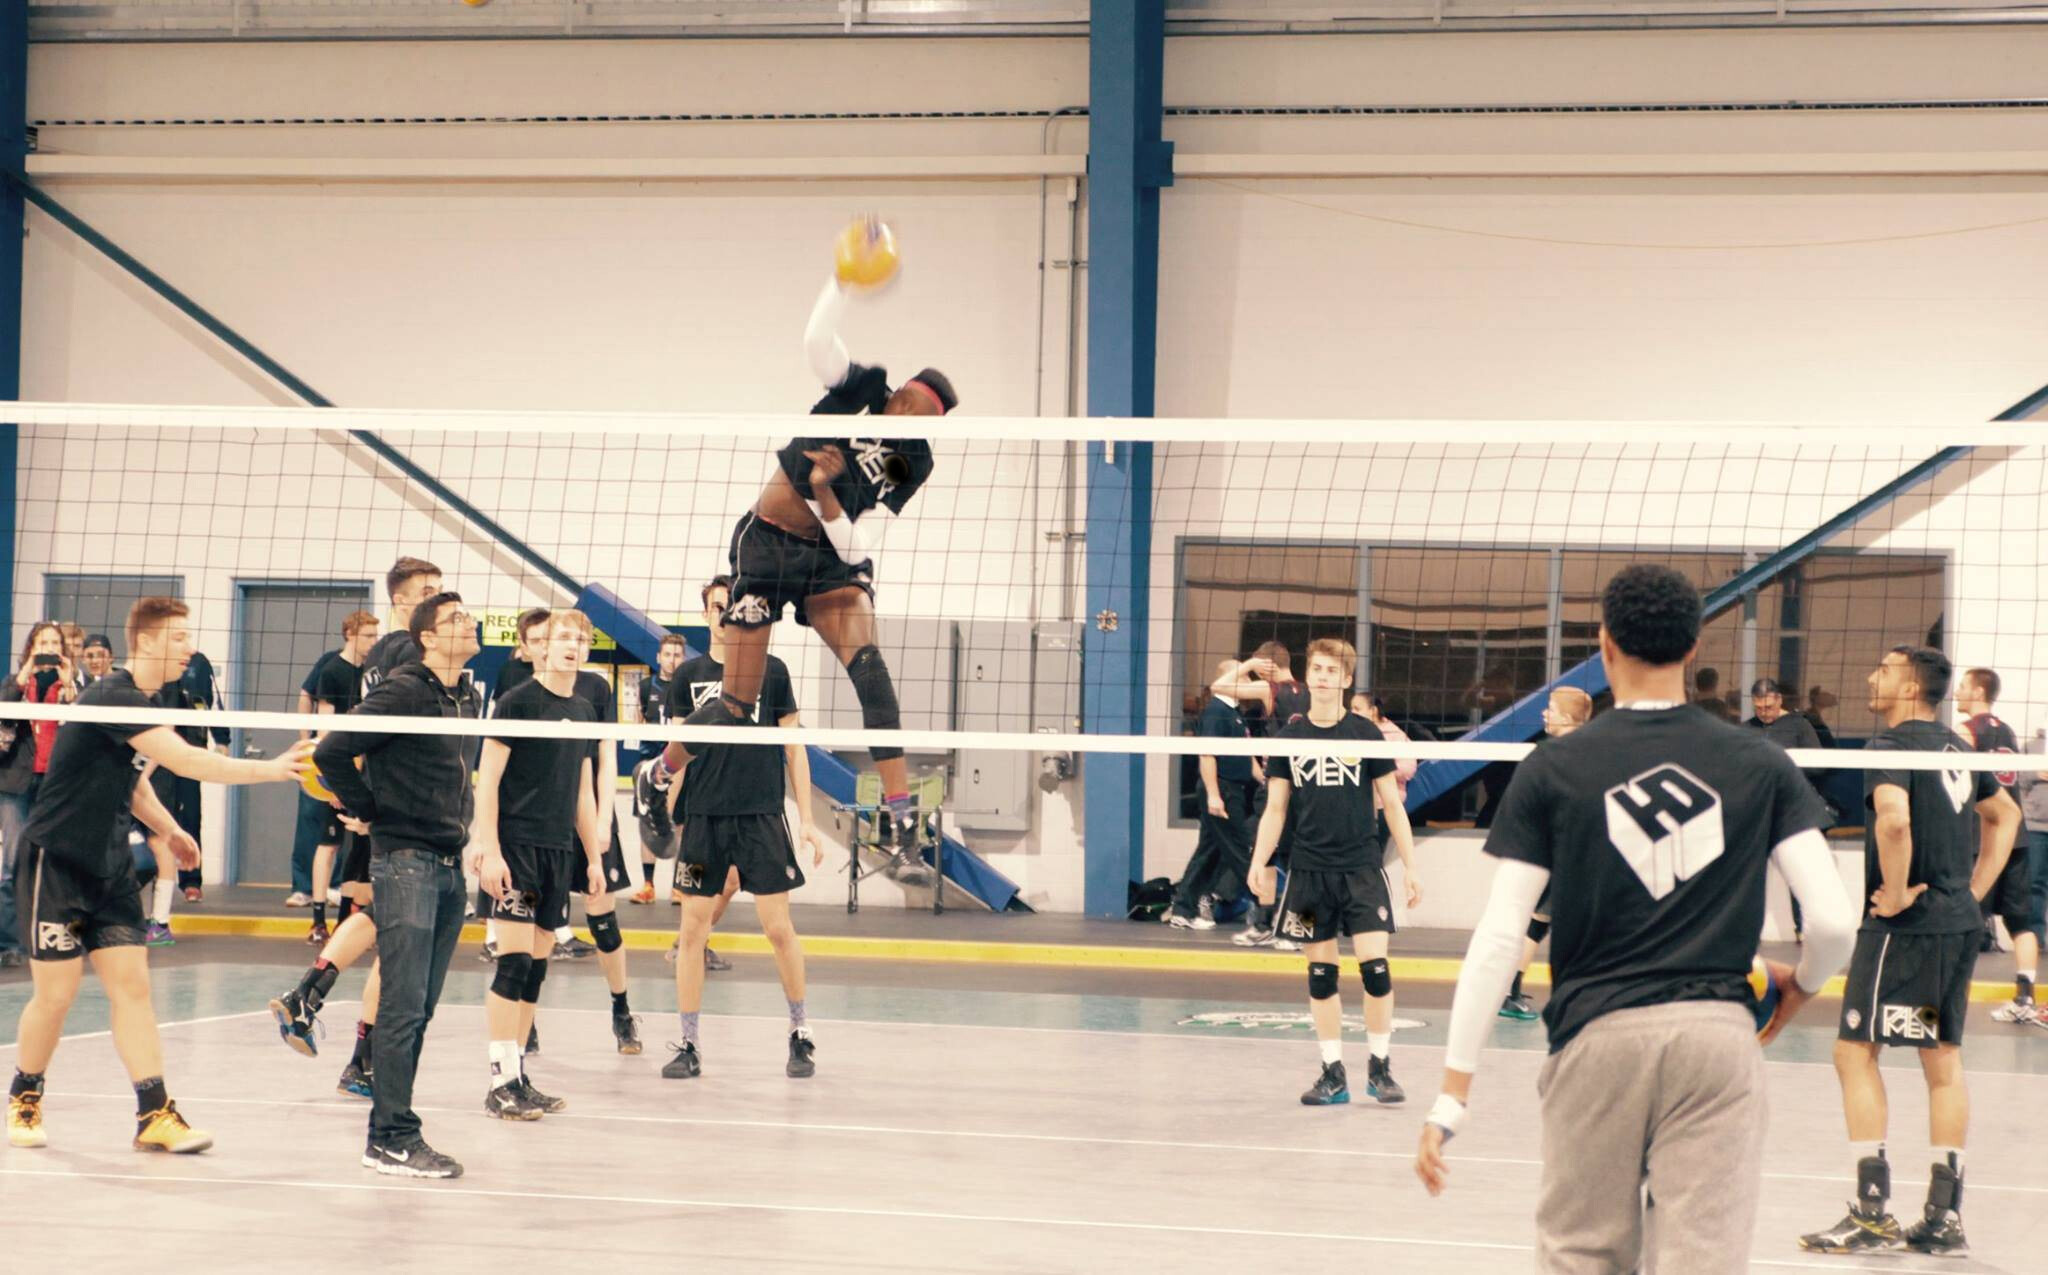 How To Increase Vertical Jump At Home For Volleyball Practice | EOUA Blog